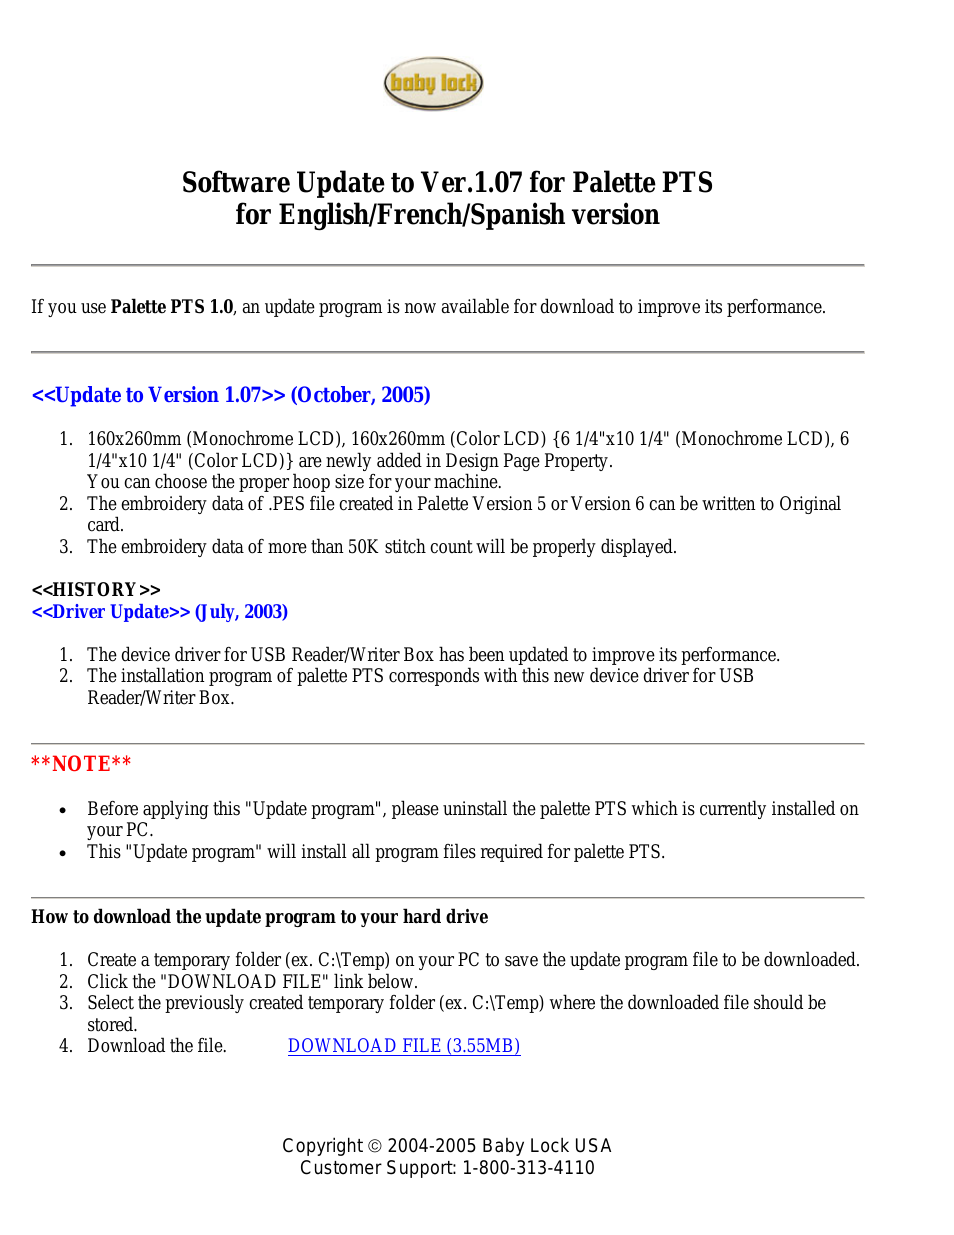 Palette PTS (ф) Ver.1.07 Update for Windows XP/2000